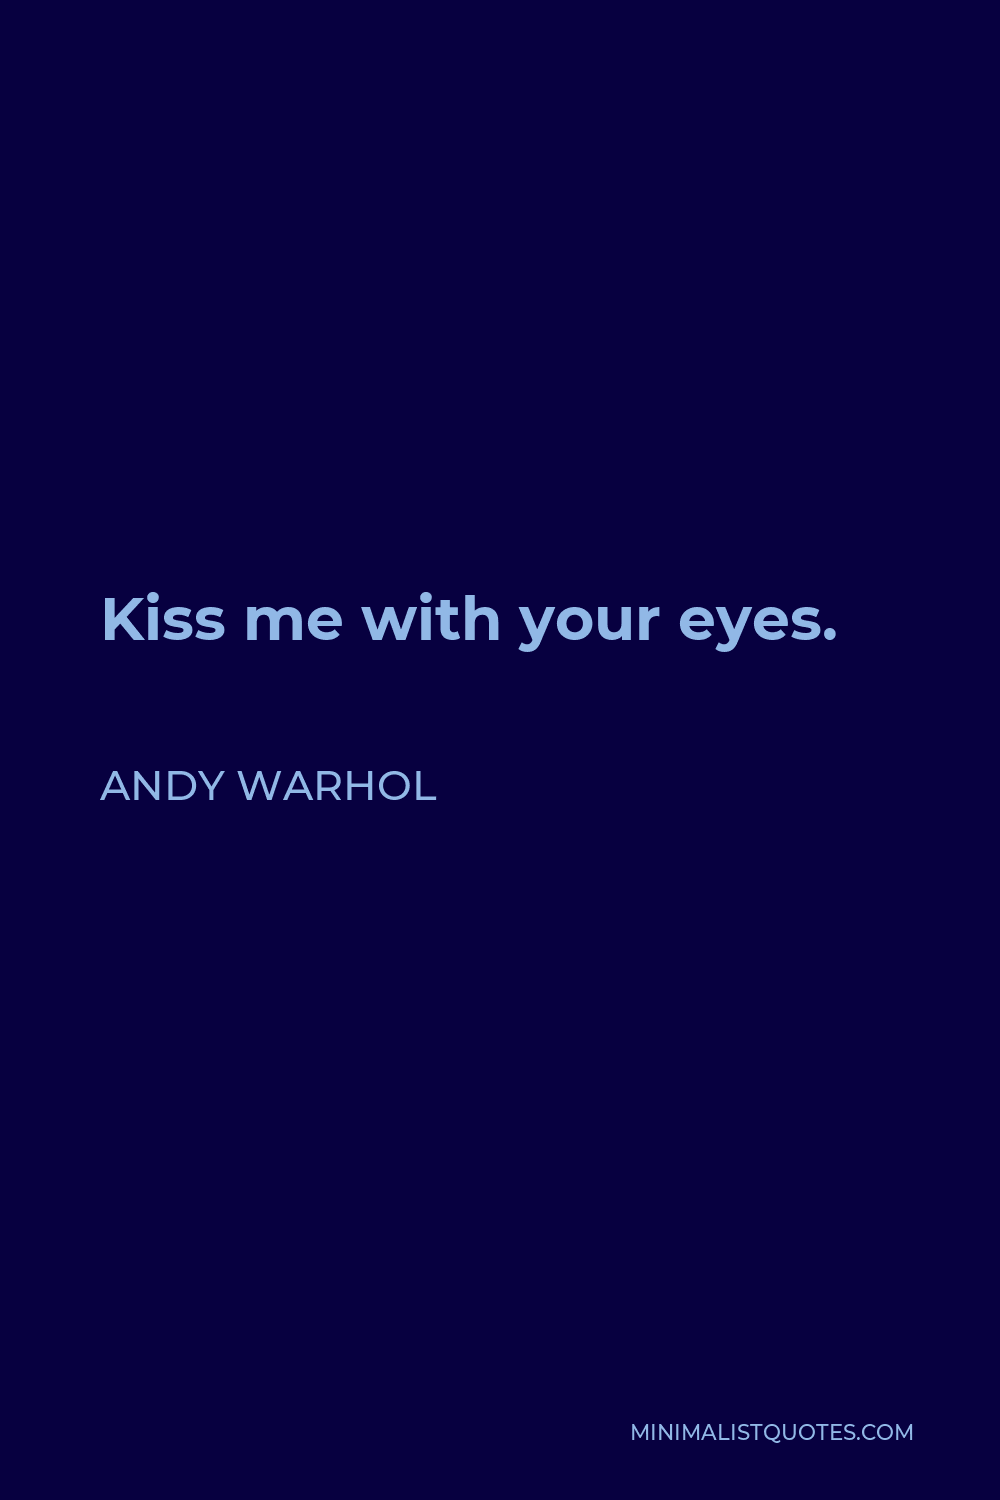 Andy Warhol Quote - Kiss me with your eyes.